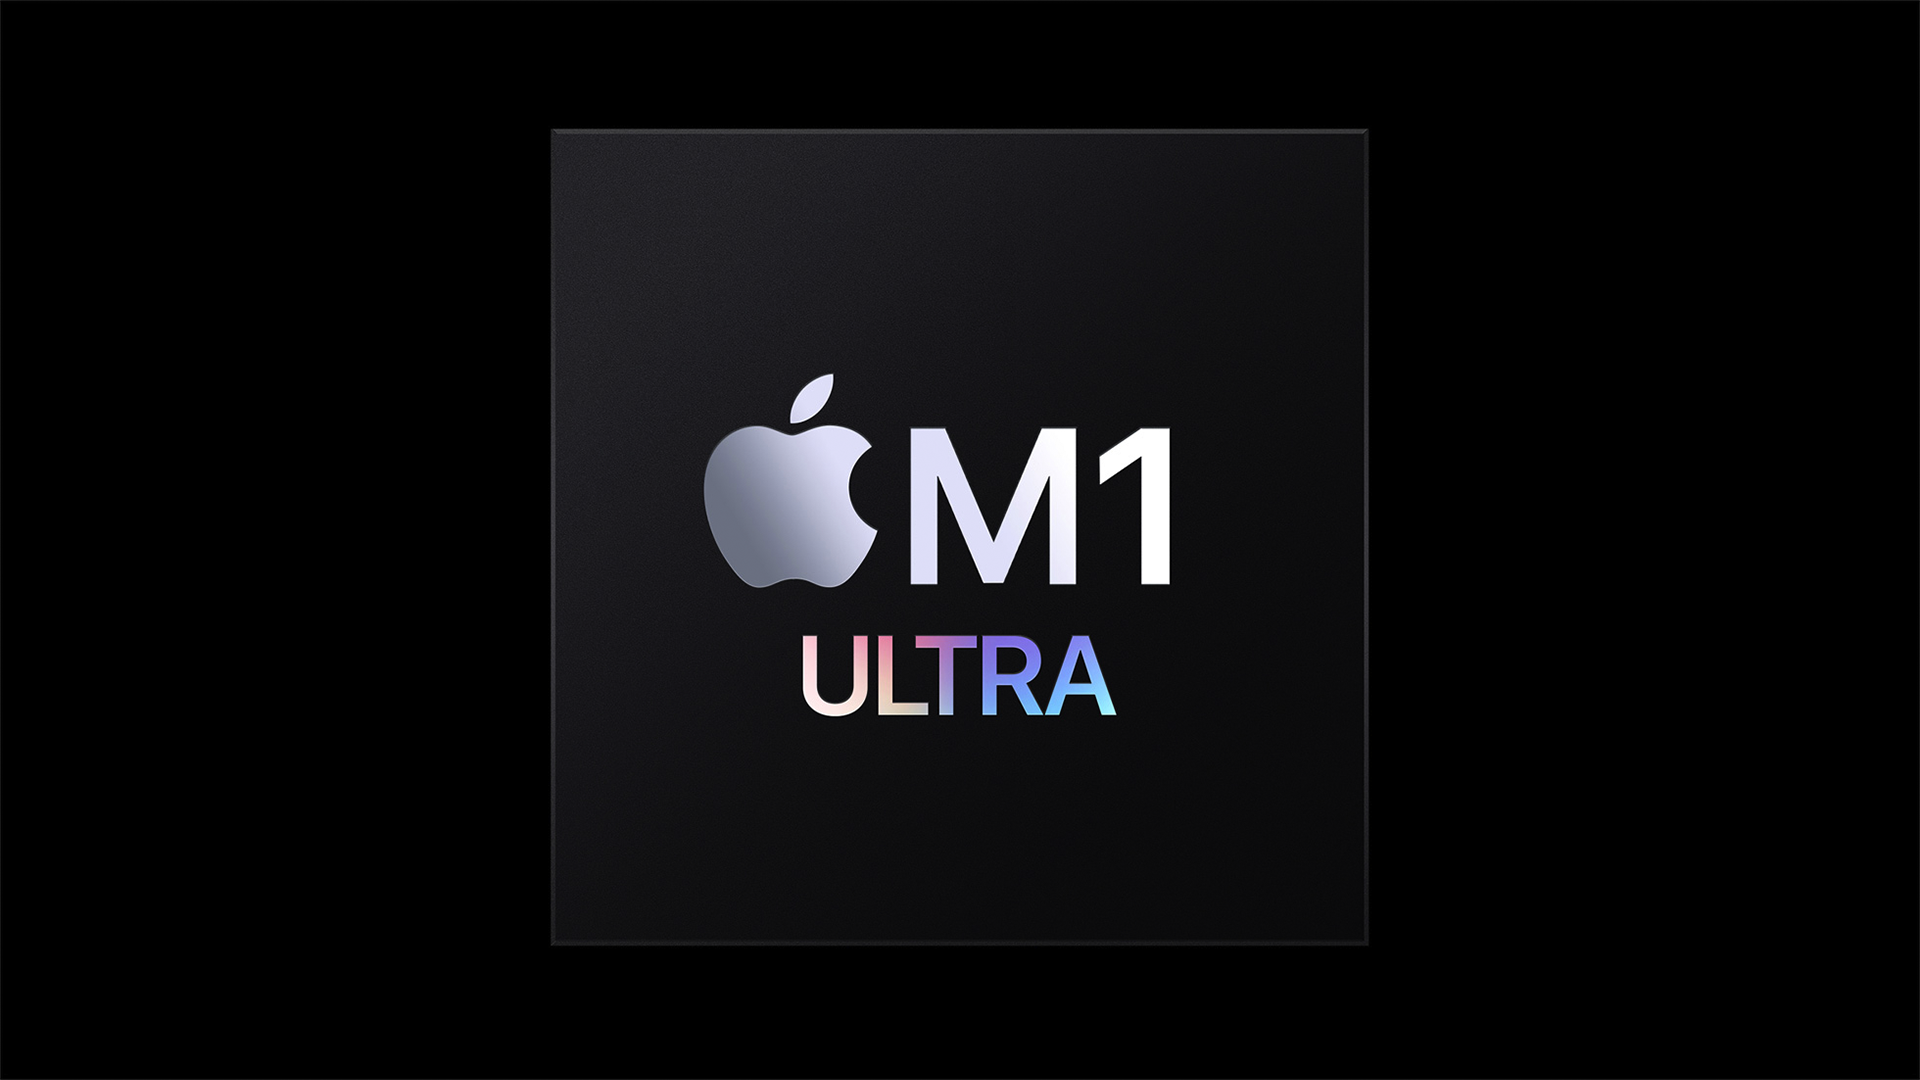 A logo for Apple's M1 Ultra chip.